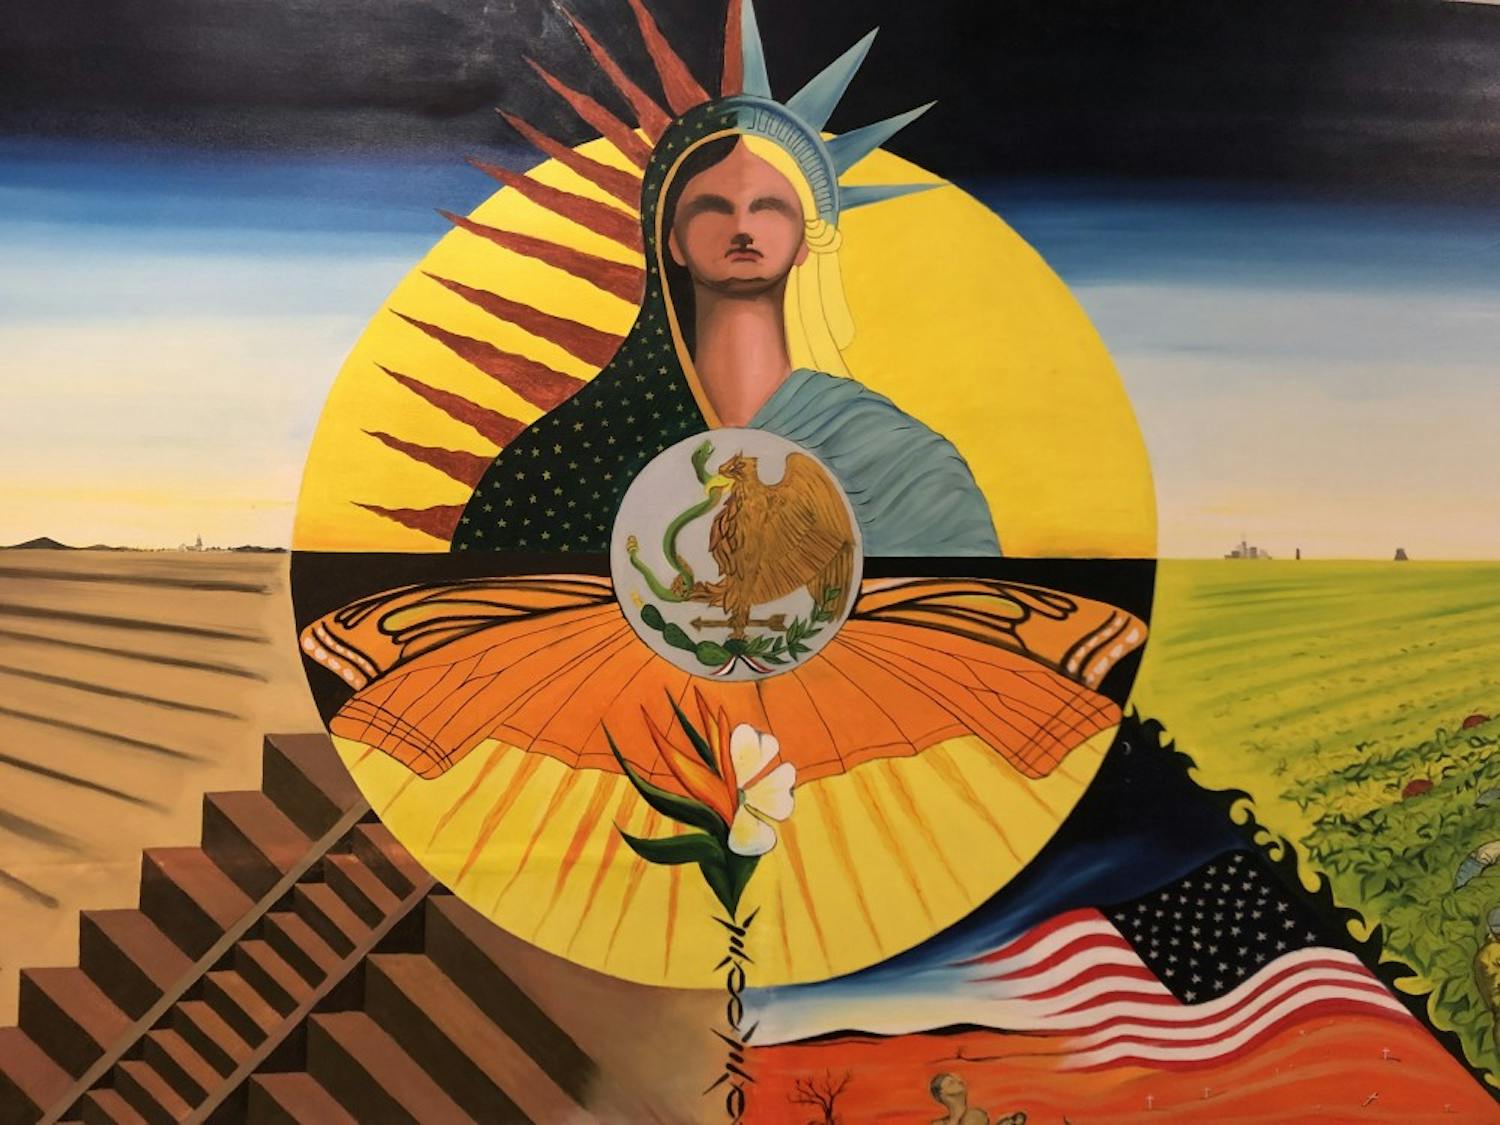 Cornelio Campos’ painting ‘Realidad Norteno’ located on the third floor of the Student Union on Thursday, Feb. 28, 2019. The painting was originally housed in the Campus Y’s Anne Queen Room, but was recently removed.